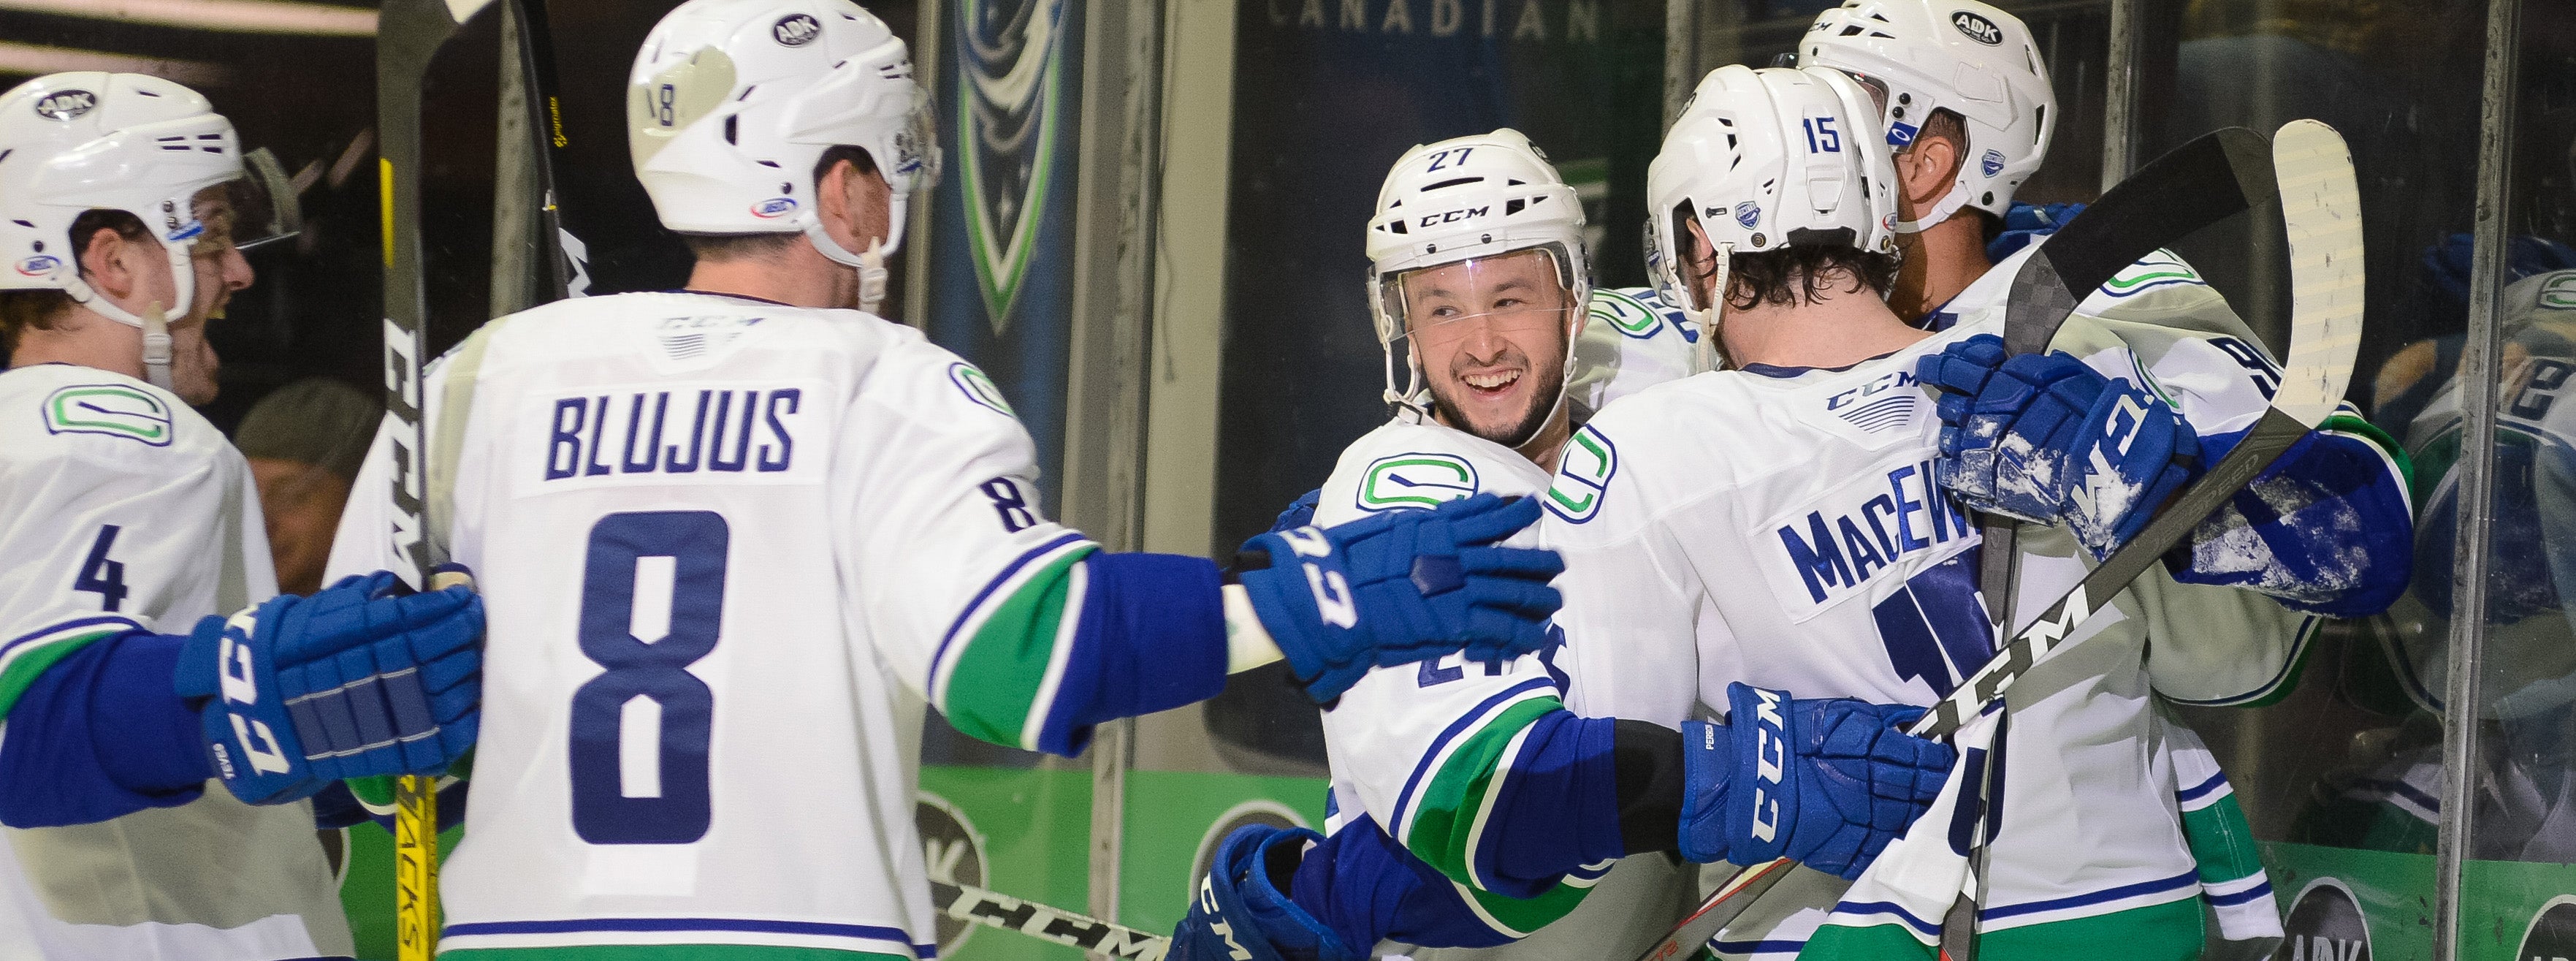 COMETS CRUSH CHECKERS TO STAY UNDEFEATED